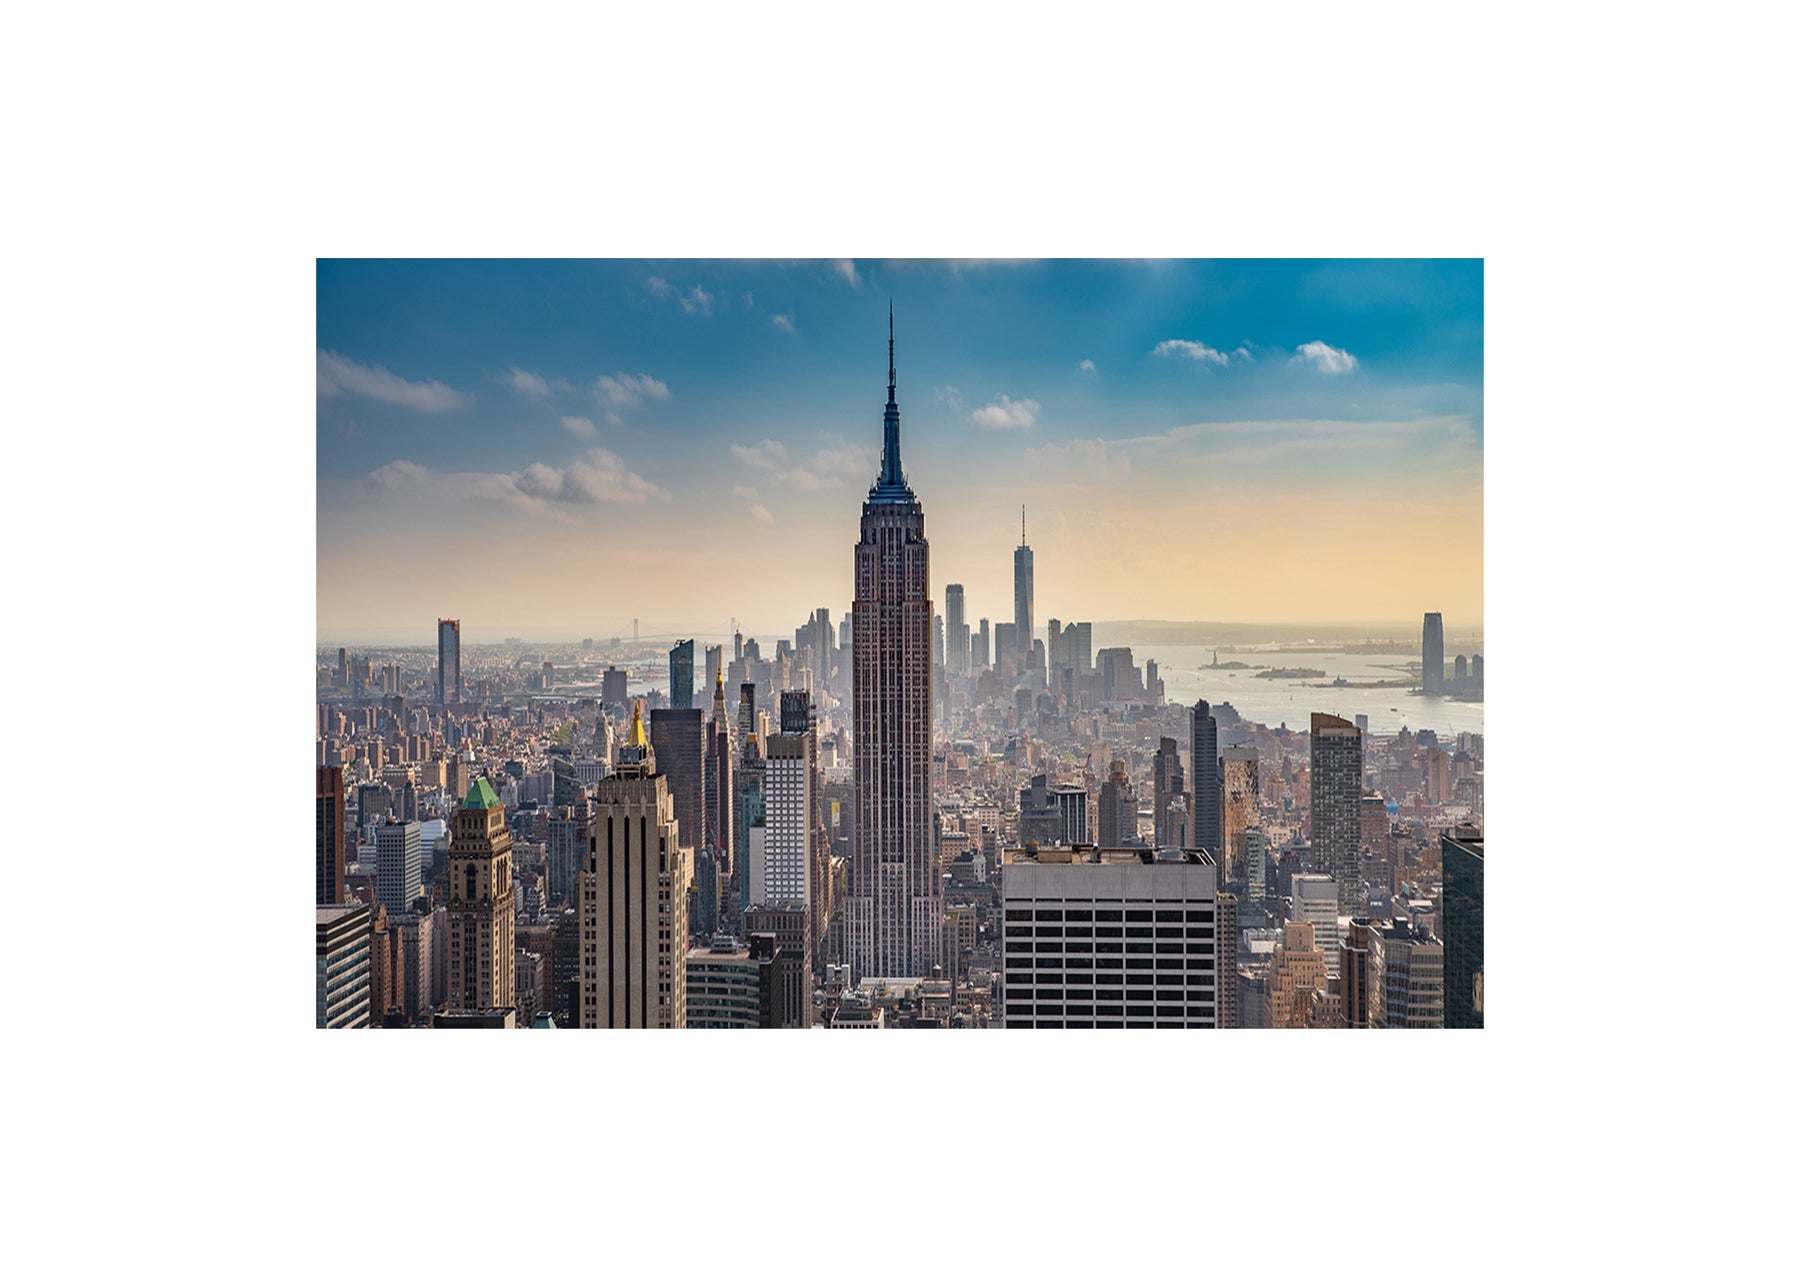 New York - What You Need to Know About the Novel Coronavirus and Measures Taken